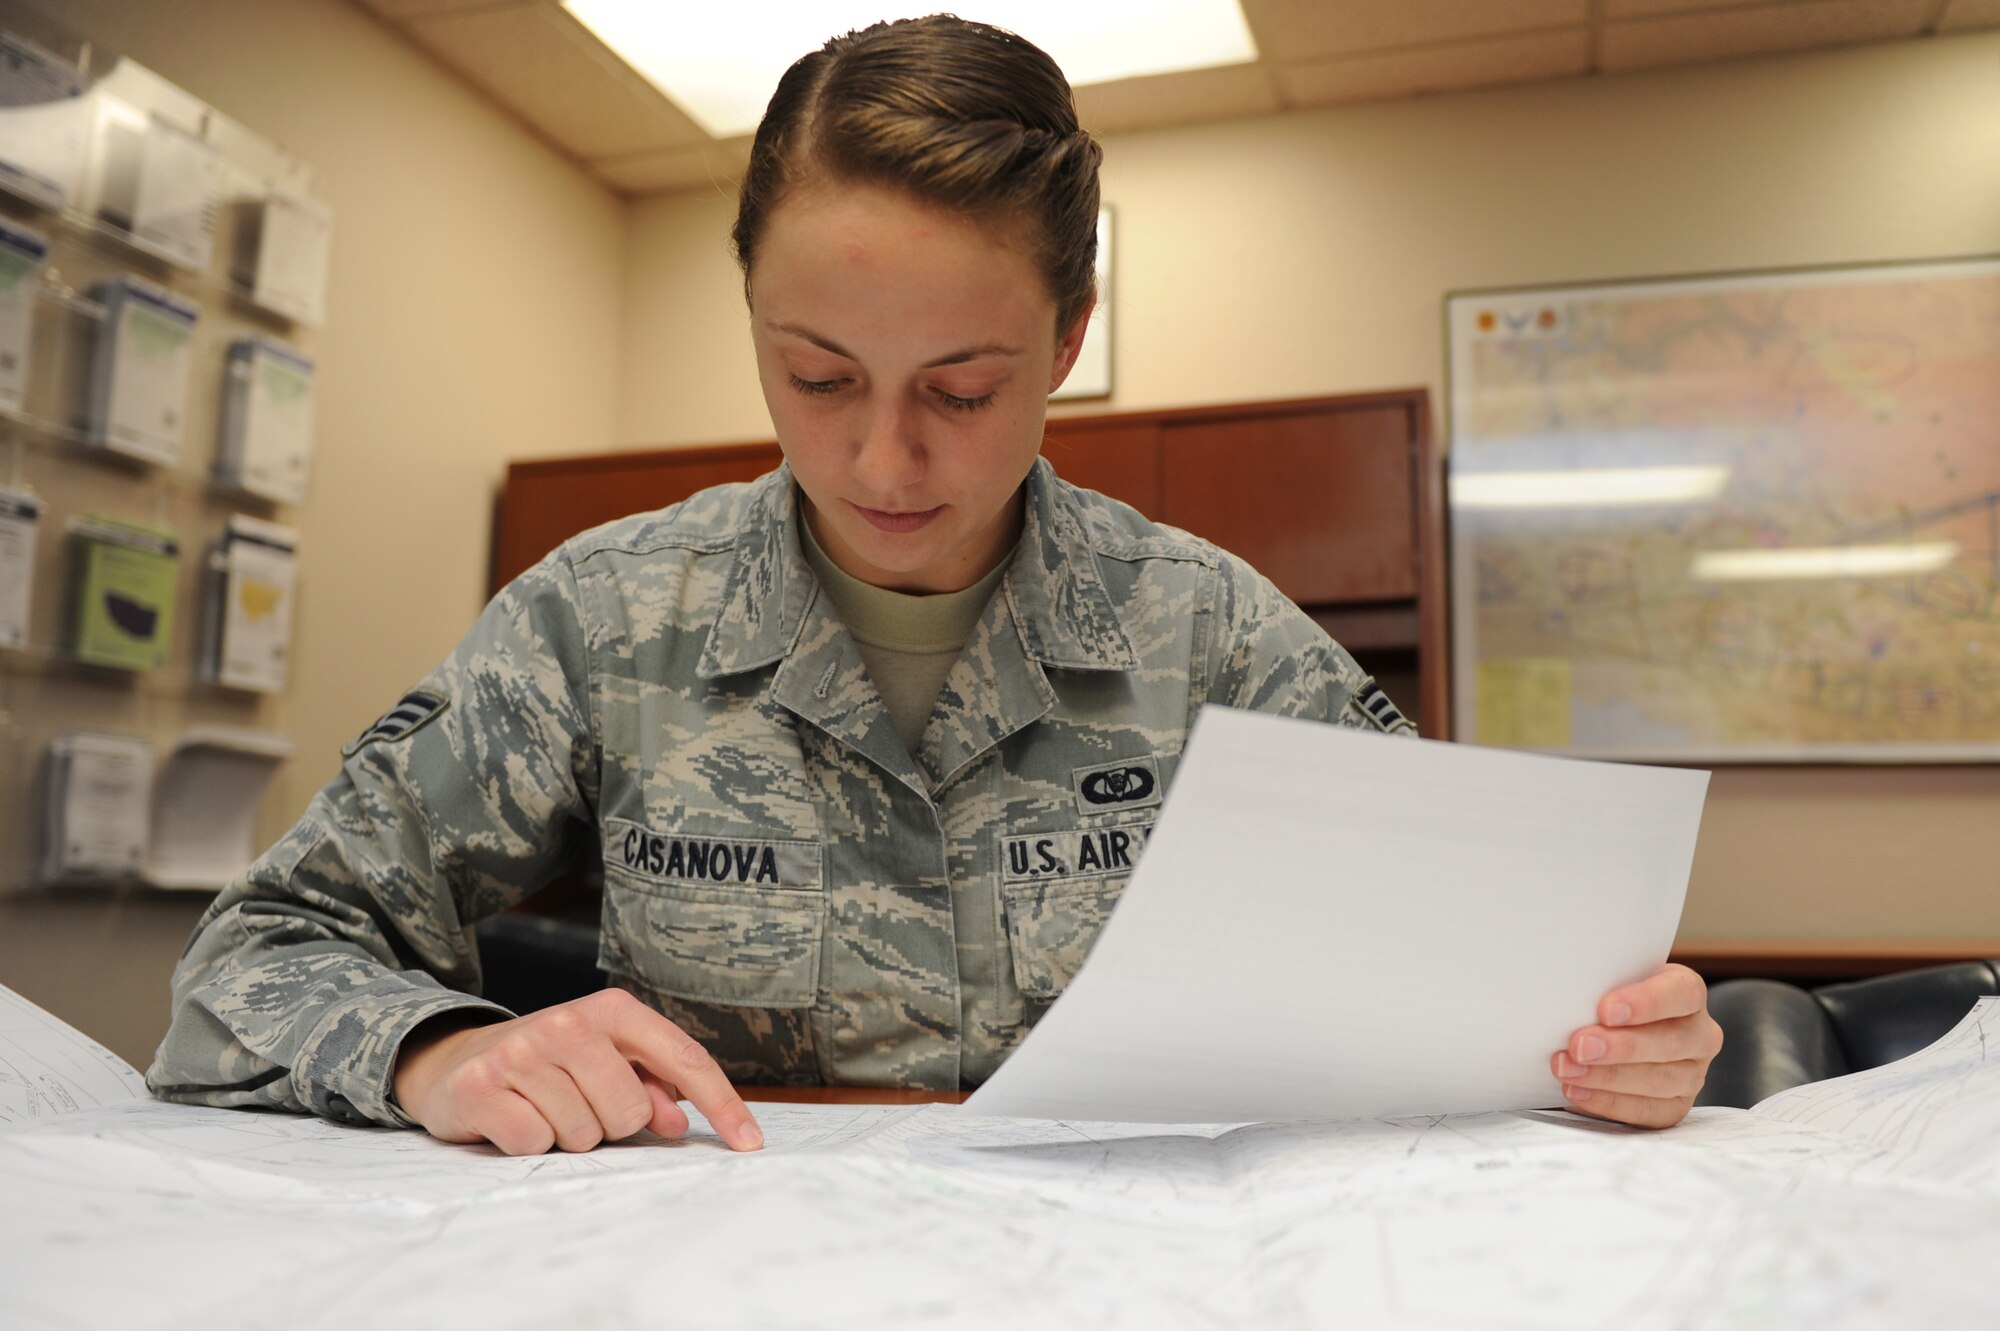 Senior Airman Monica Casanova, 56th Operations Support Squadron airfield management shift lead, references a map against a flight plan at the Luke Air Force Base airfield management office Oct 13 2015. Airfield managers log and keep pilot flight plans to have in case of emergency. (U.S. Air Force photo by Staff Sgt. Staci Miller)
